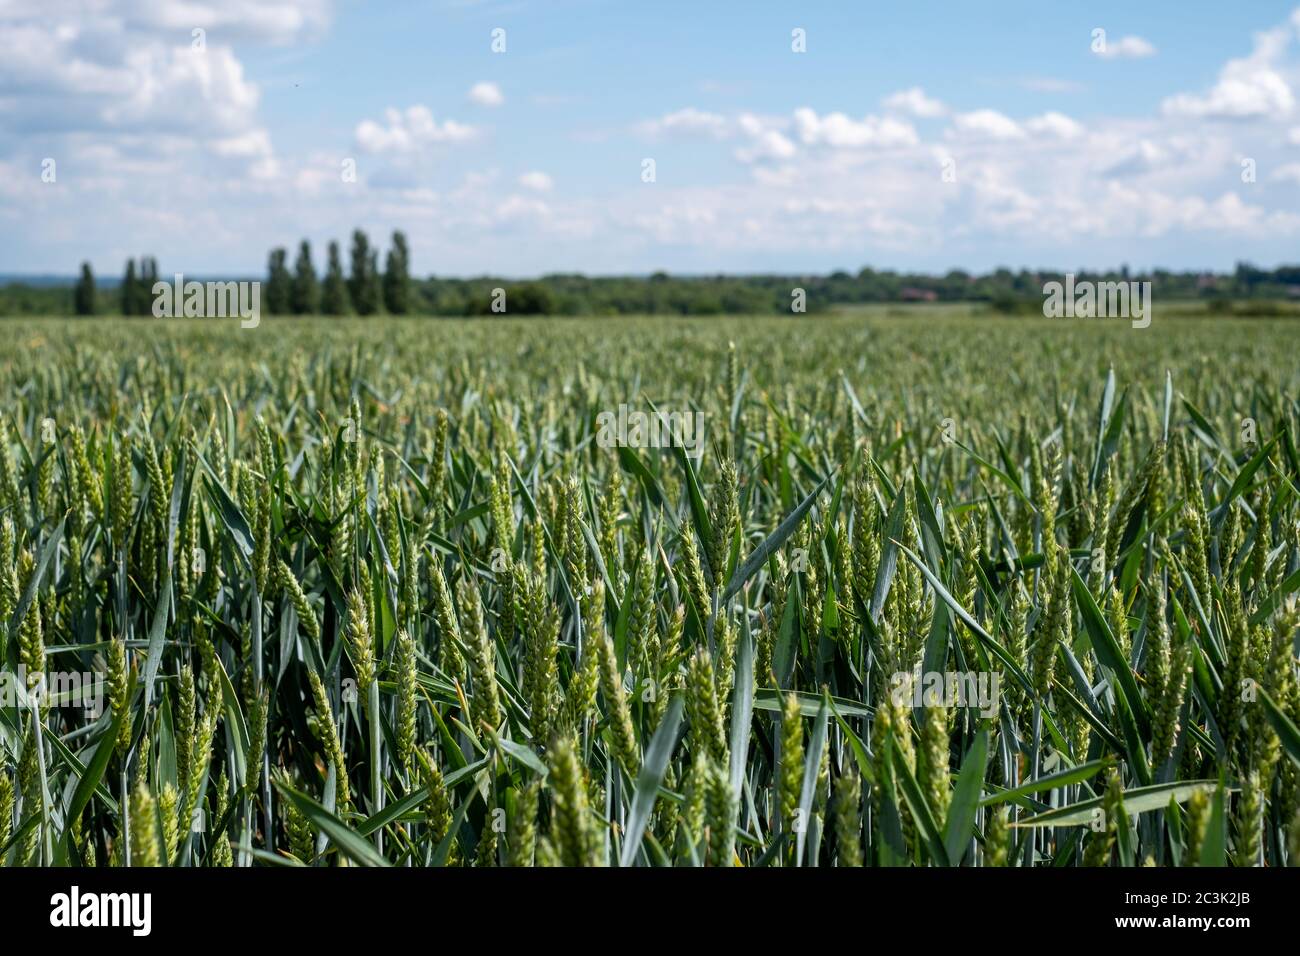 View of wheat field on a sunny day in June. Photographed near Heartwood Forest, Sandridge, Hertfordshire UK Stock Photo